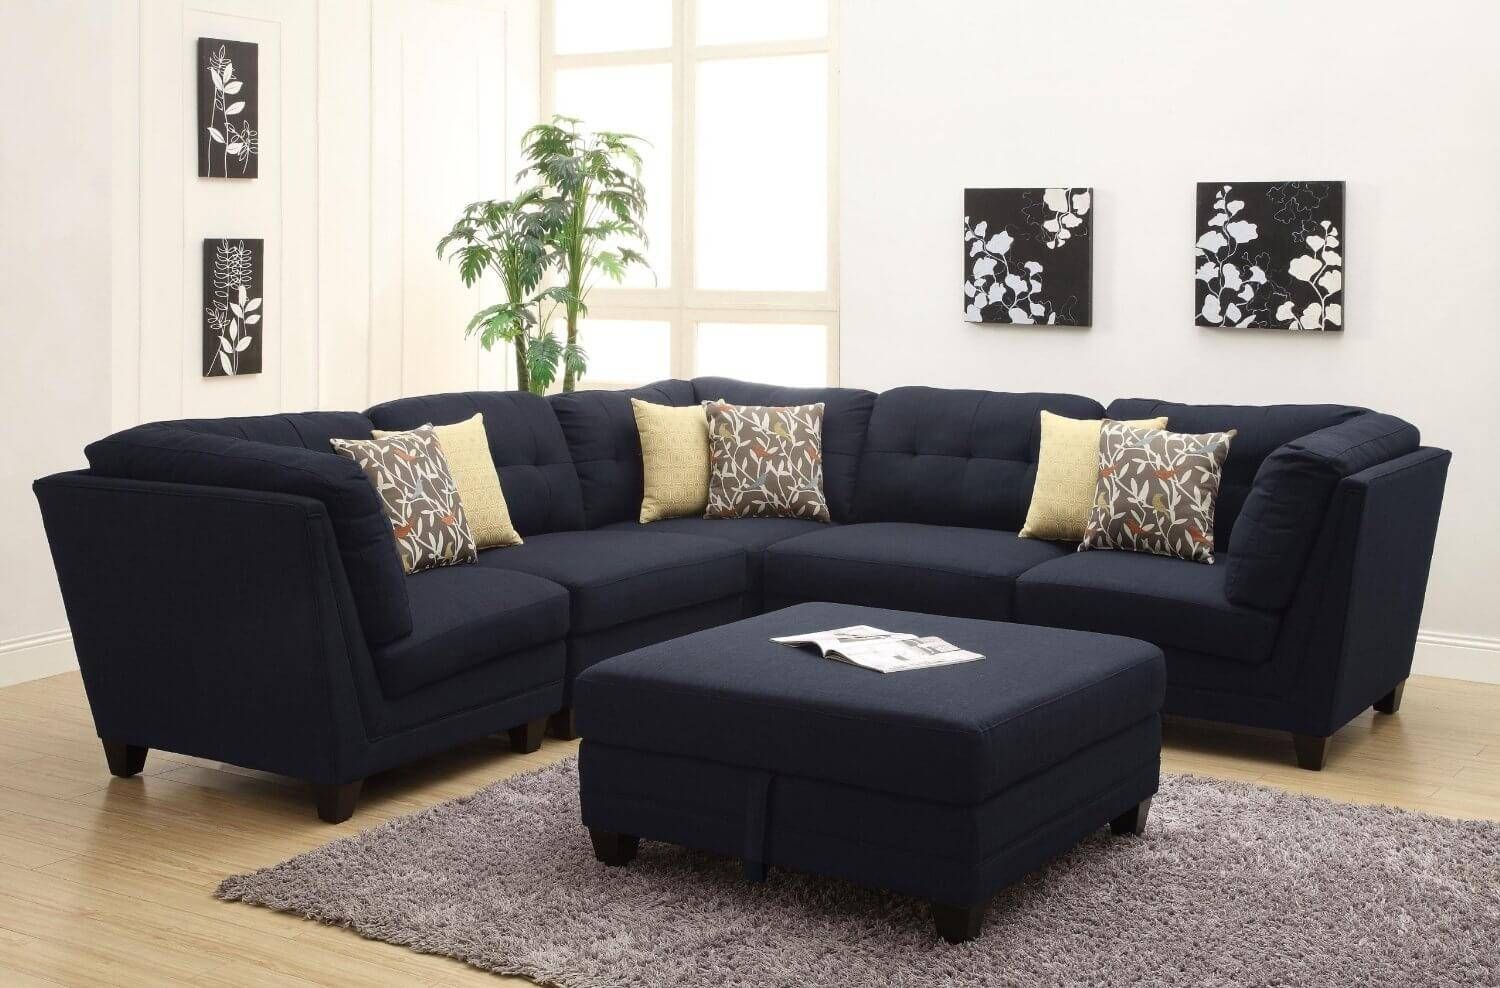 Amusing Multi Piece Sectional Sofa 95 On 6 Piece Modular Sectional In 6 Piece Modular Sectional Sofa (View 11 of 30)